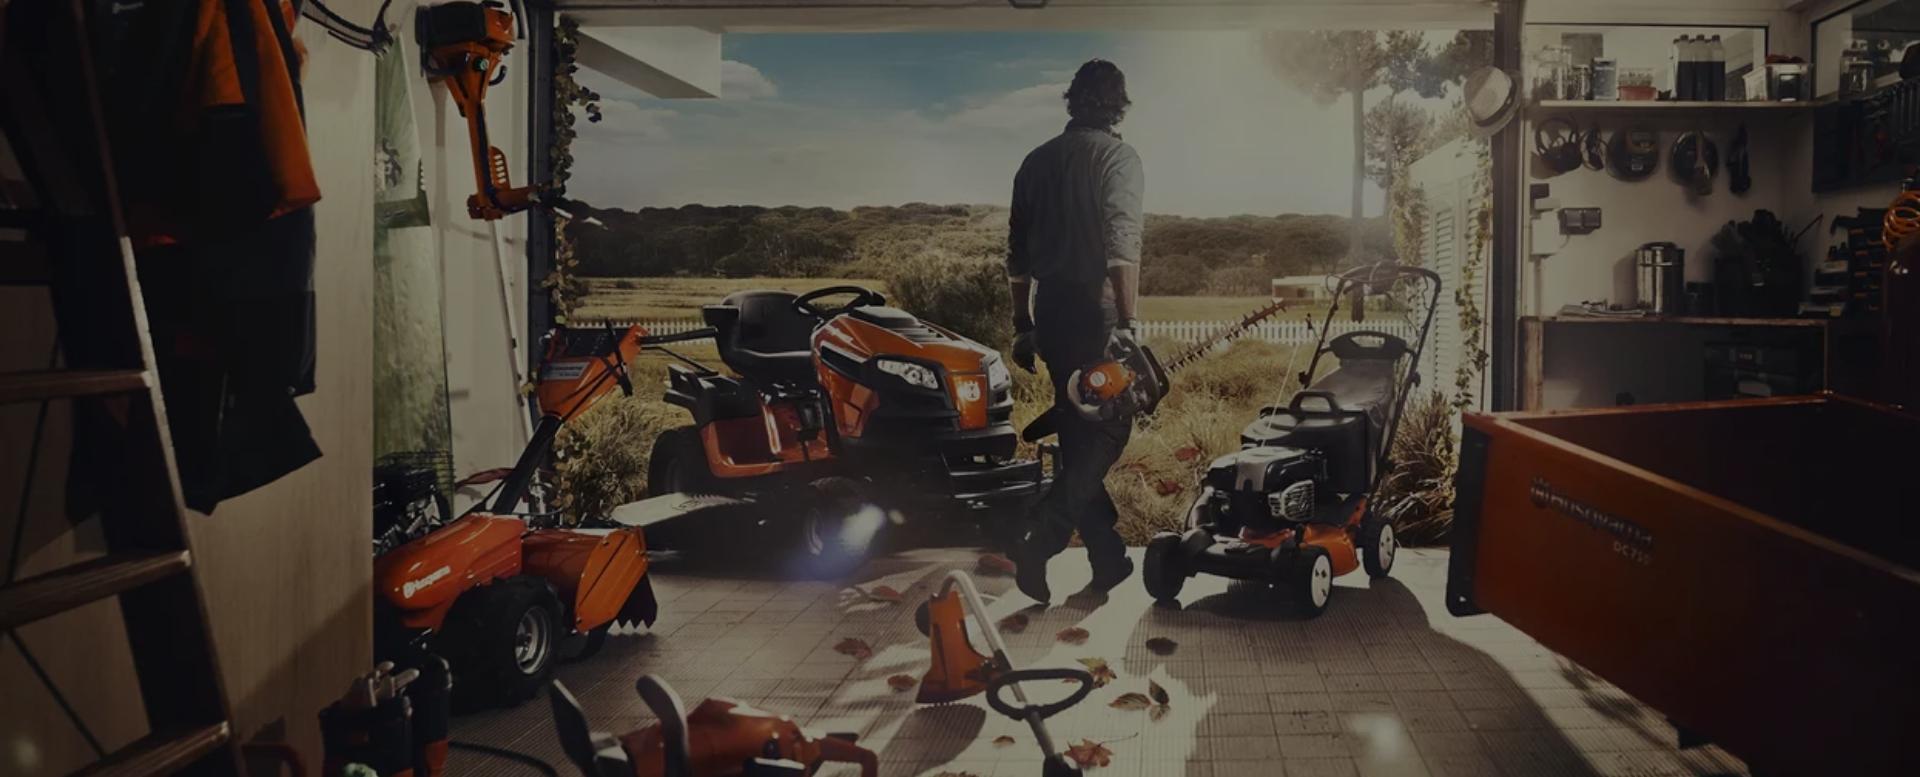 Husqvarna products are available at Leslies Outdoor Power Equipment